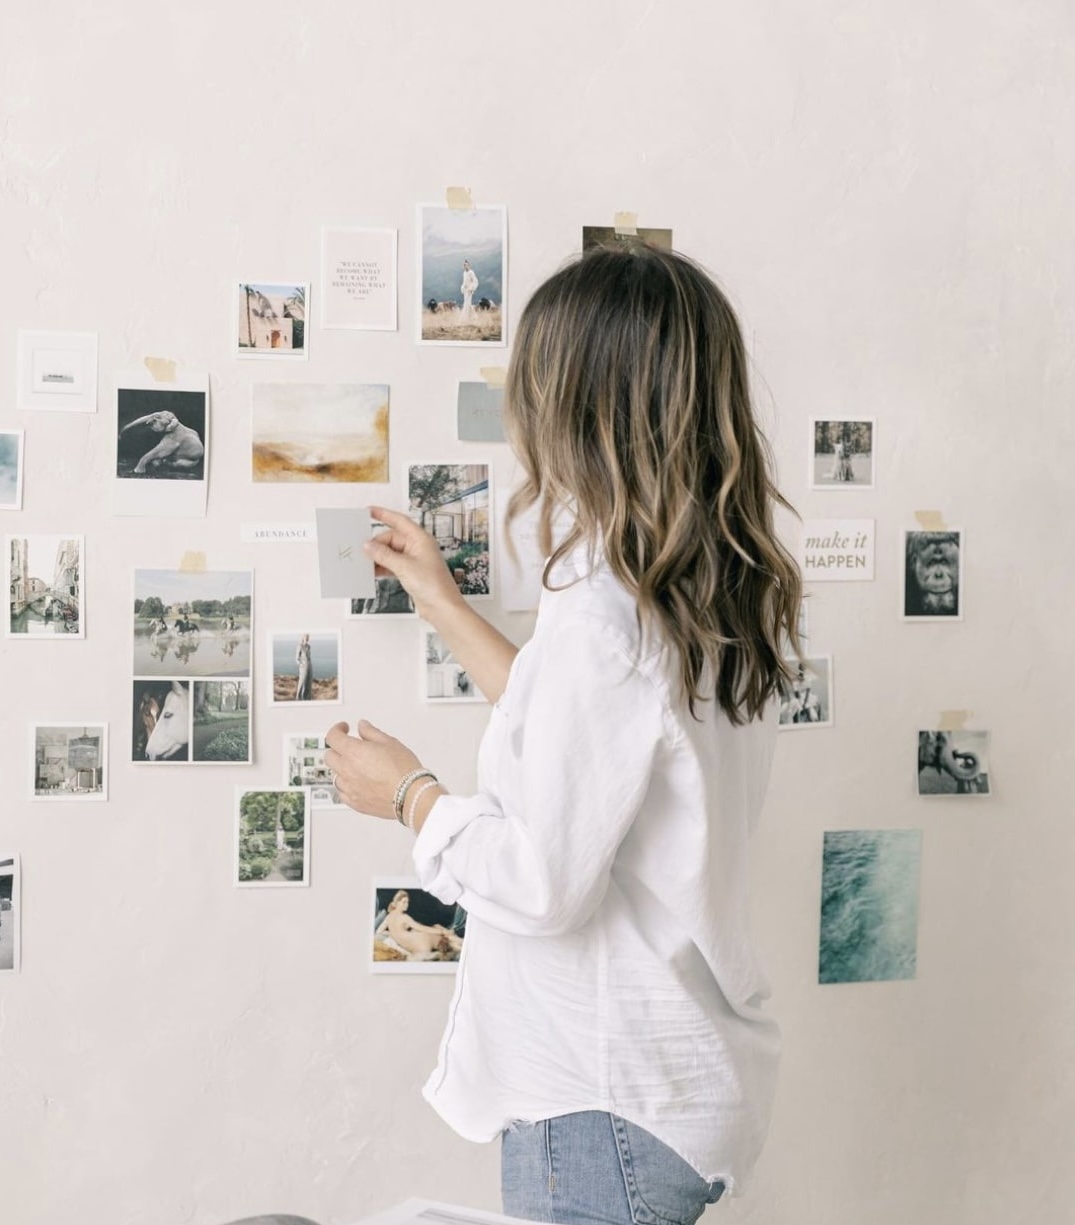 clean curated wall vision board example. Vision board examples. Vision board example. Examples of vision boards. Examples of a vision board. Example of a vision board. Ideas for vision board. Vision board ideas. Vision boards ideas